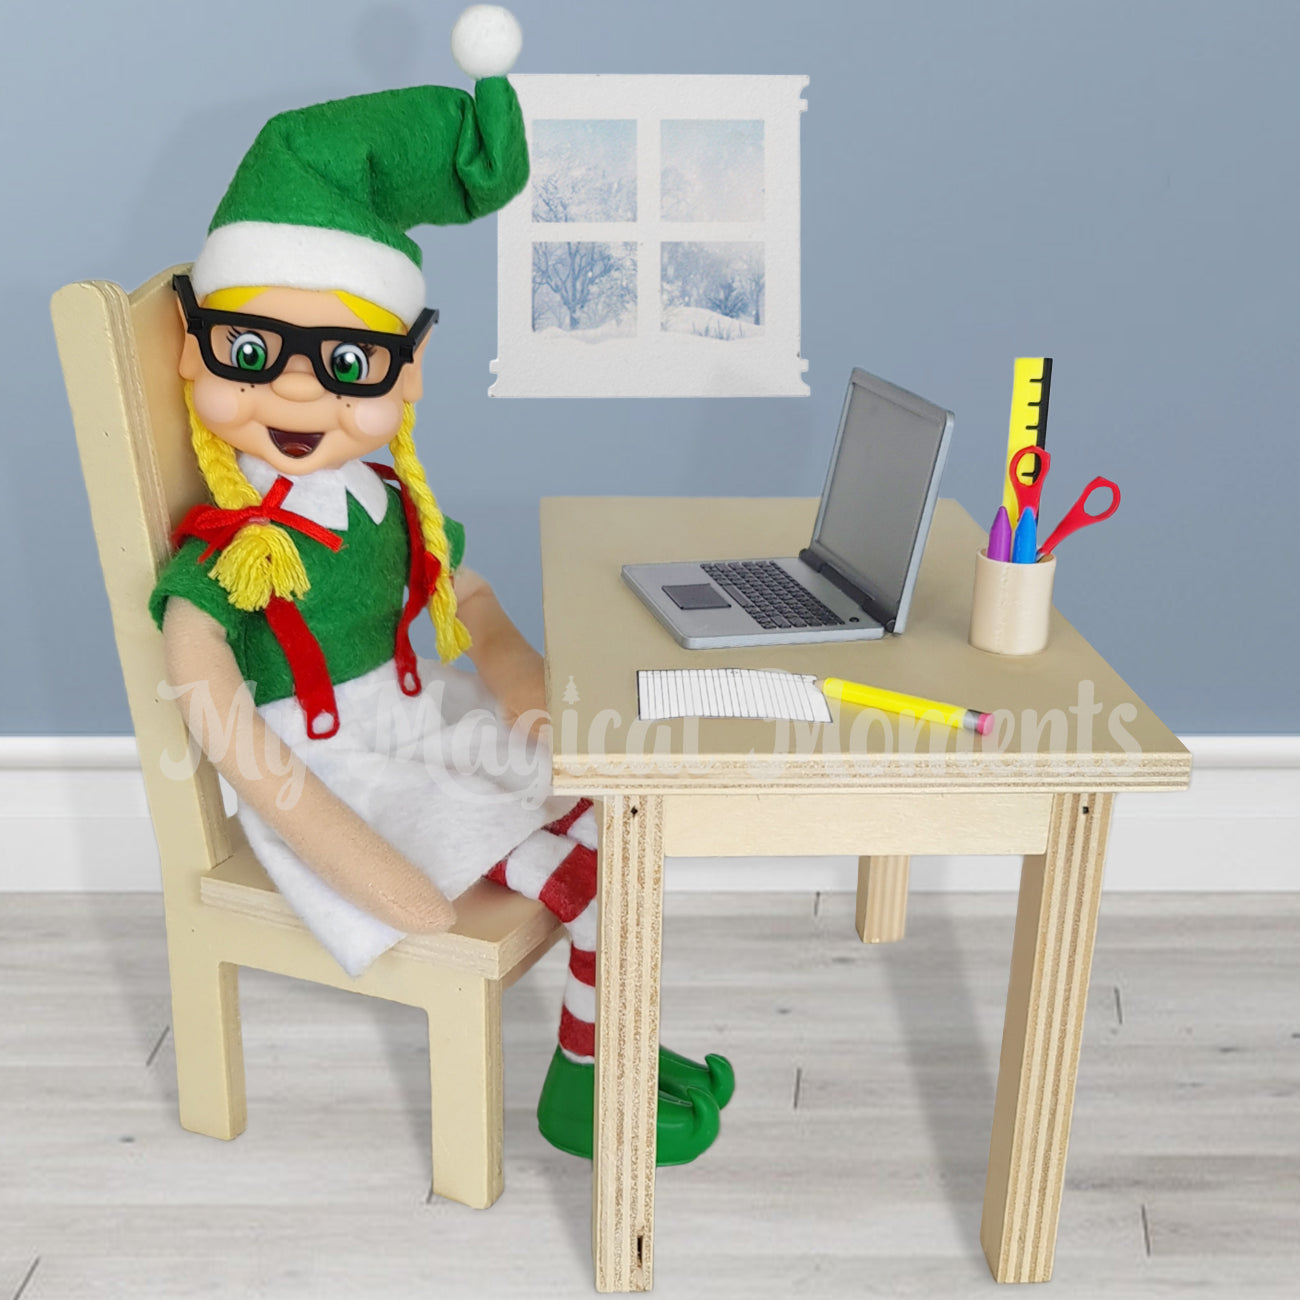 Blonde Hair Elf wearing miniature glasses. Sitting at a wooden desk working on a little laptop, stationery set can be scene and a window